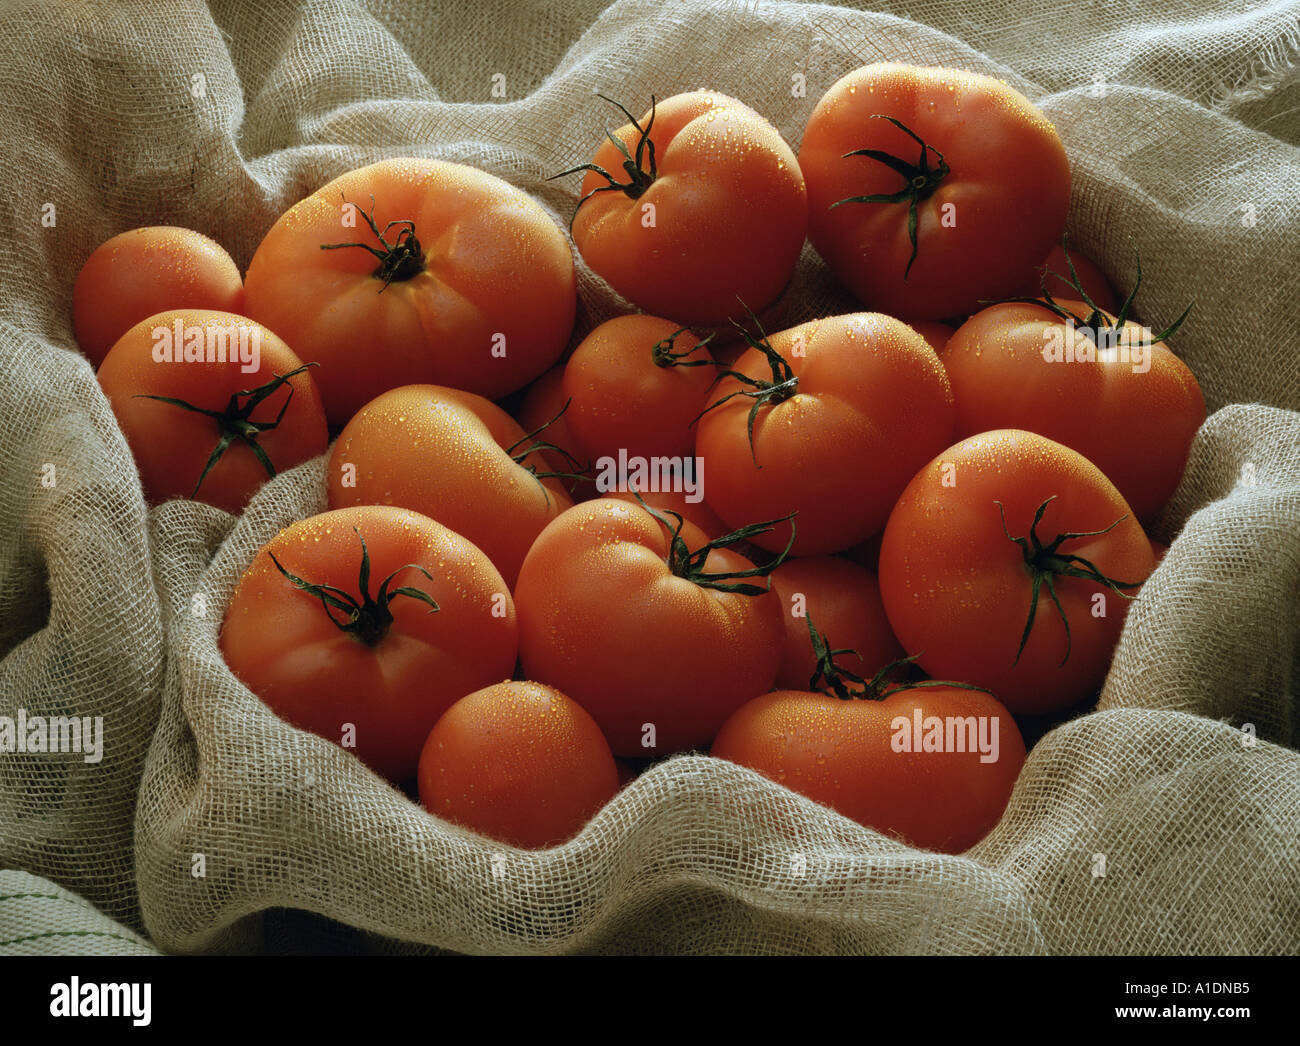 Still life of tomatoes on a hession cloth background Landscape format moody direct light Original shot on 5x4 neg Stock Photo